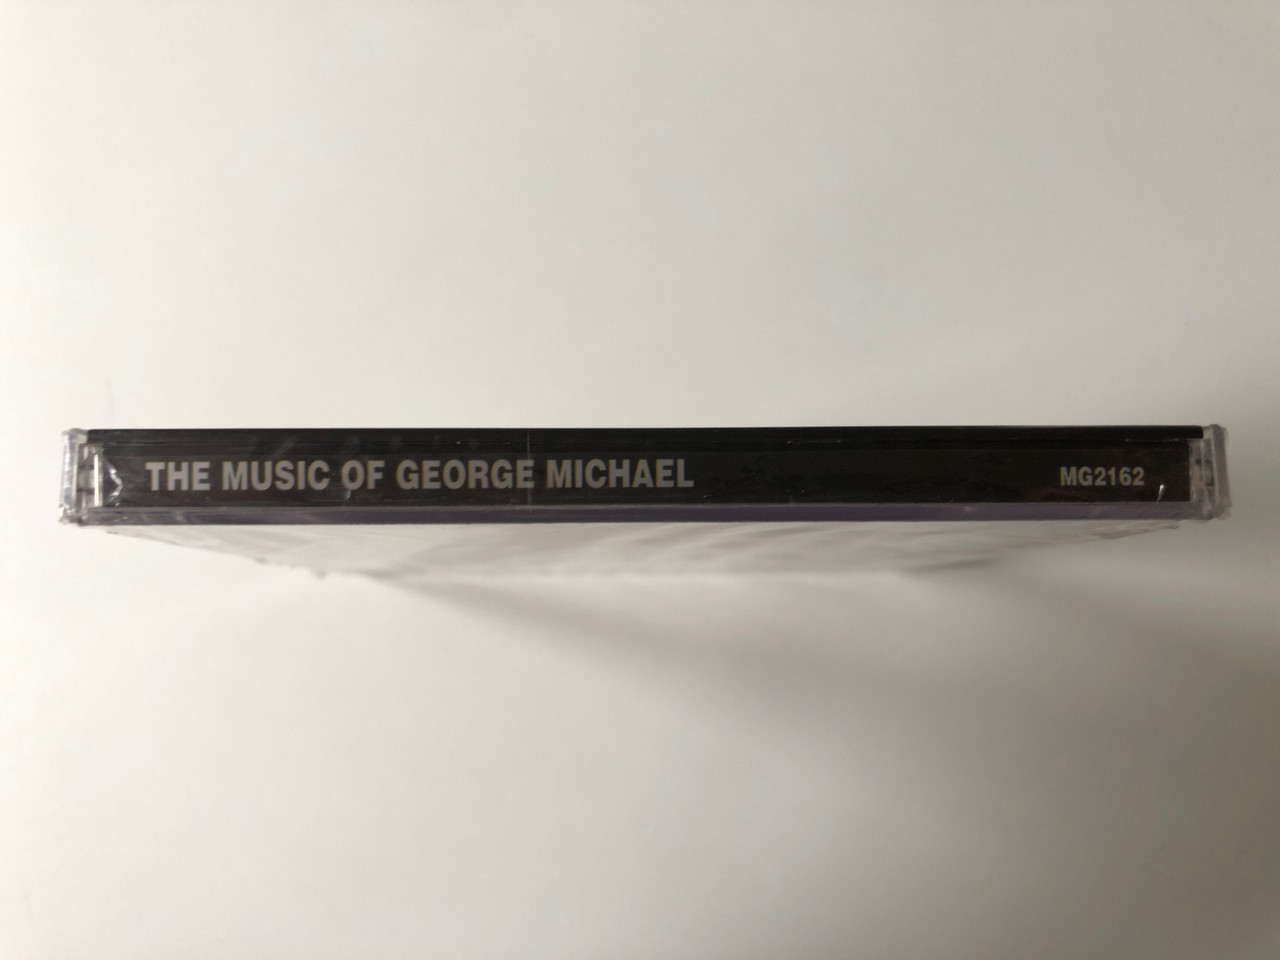 https://cdn10.bigcommerce.com/s-62bdpkt7pb/products/0/images/296700/The_Music_Of_George_Michael_-_Performed_By_Jason_Clark_Careless_Whisper_Dont_Let_The_Sun_Go_Down_On_Me_Father_Figure_I_Want_Your_Sex_Freedom_This_Album_Contains_Cover_Versions_Mille_3__51435.1693242011.1280.1280.JPG?c=2&_gl=1*1xrv31w*_ga*MjA2NTIxMjE2MC4xNTkwNTEyNTMy*_ga_WS2VZYPC6G*MTY5MzIyNzczNi4xMDQ4LjEuMTY5MzI0MTYxNS4xNy4wLjA.